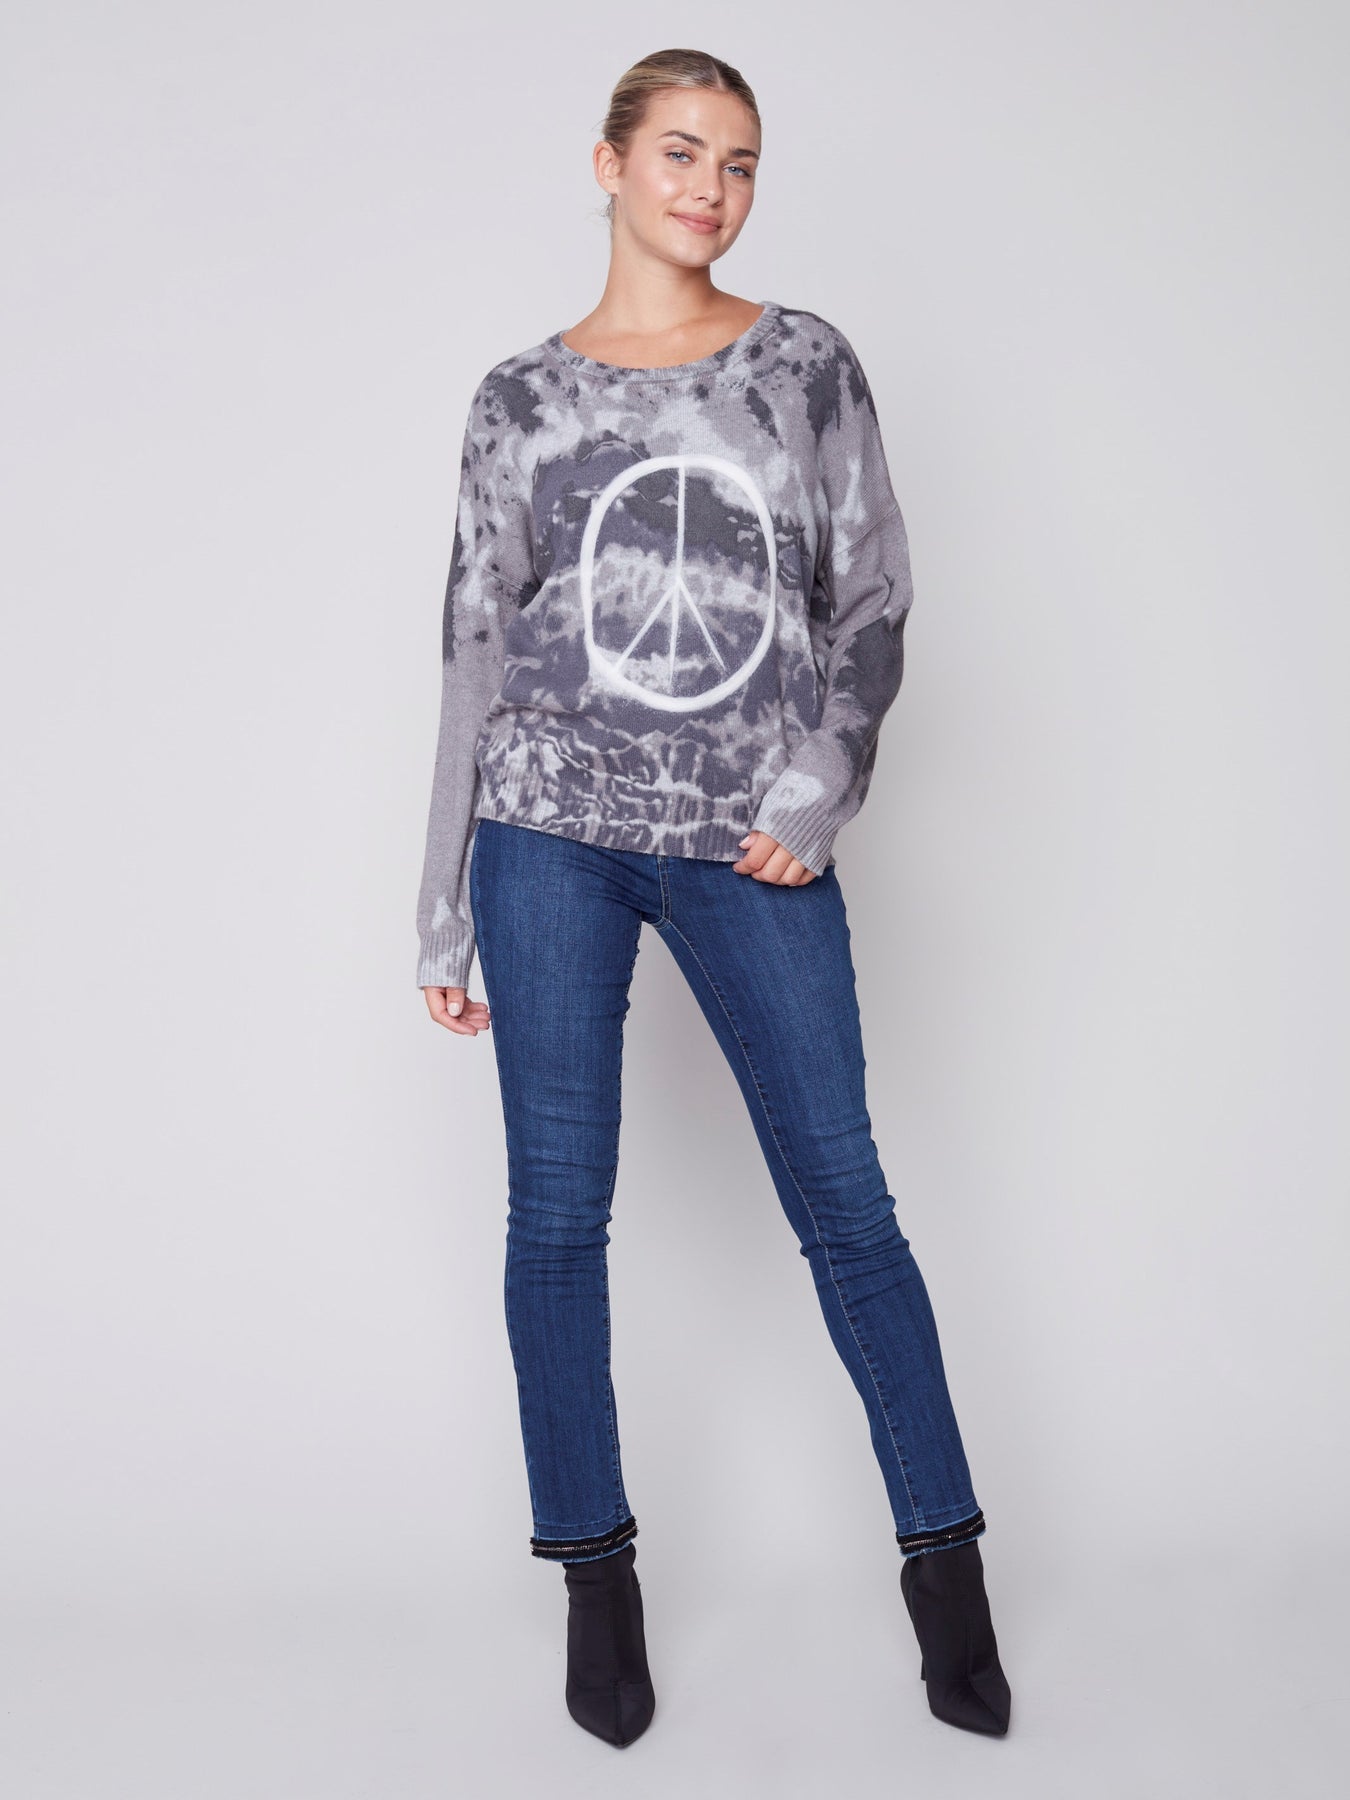 Charlie B Printed Crew Neck Sweater with Peace Symbol - Charcoal